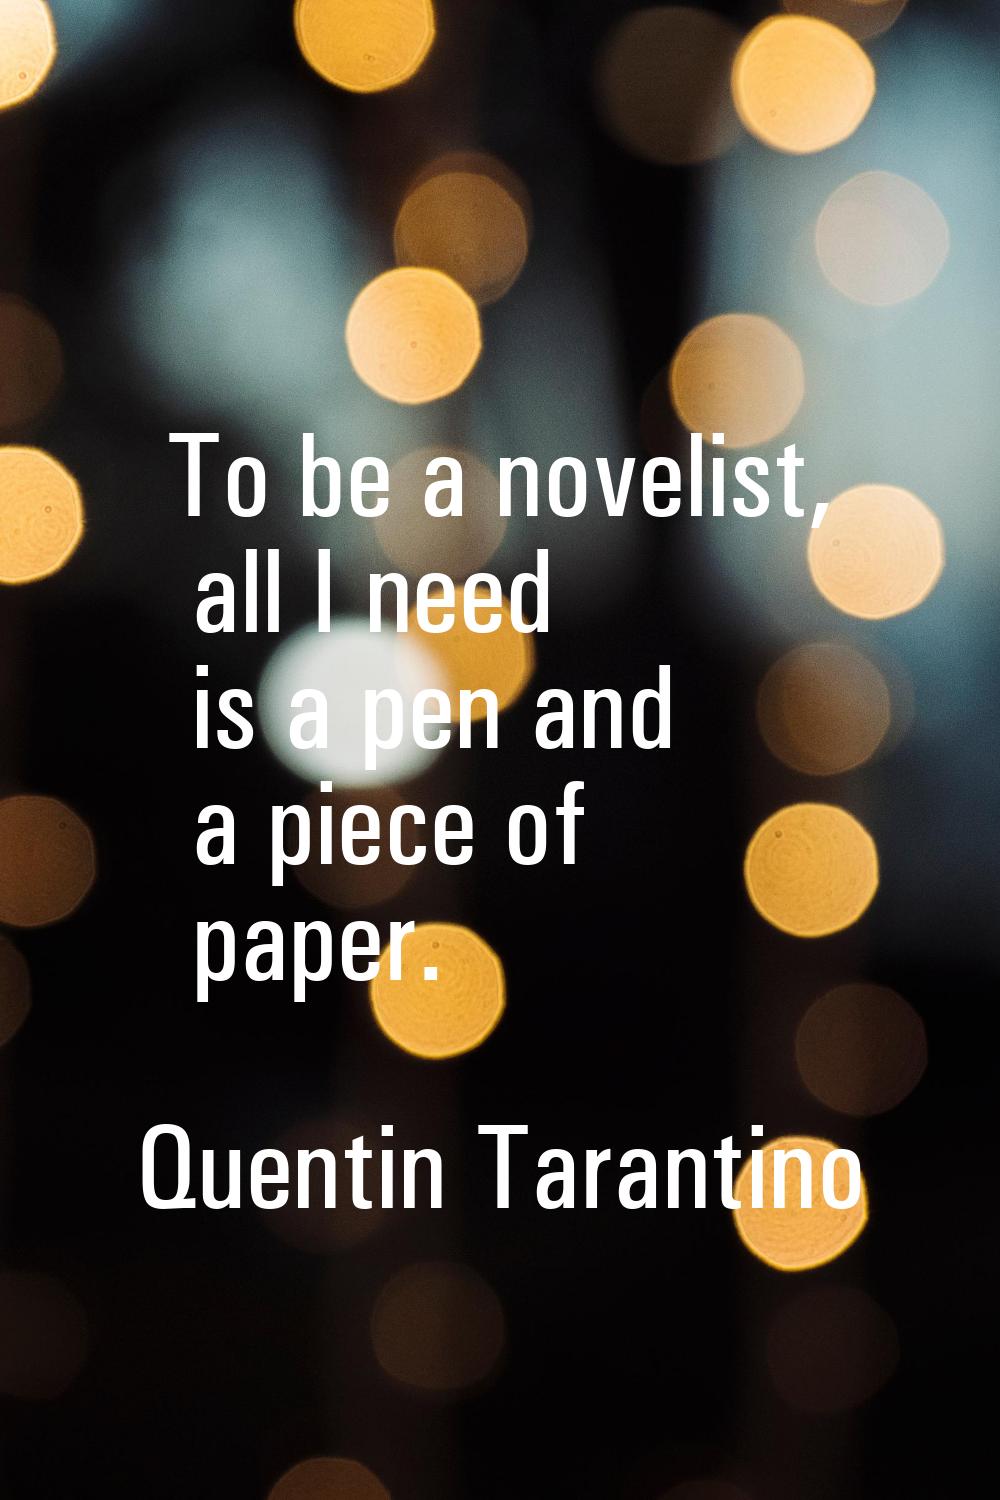 To be a novelist, all I need is a pen and a piece of paper.